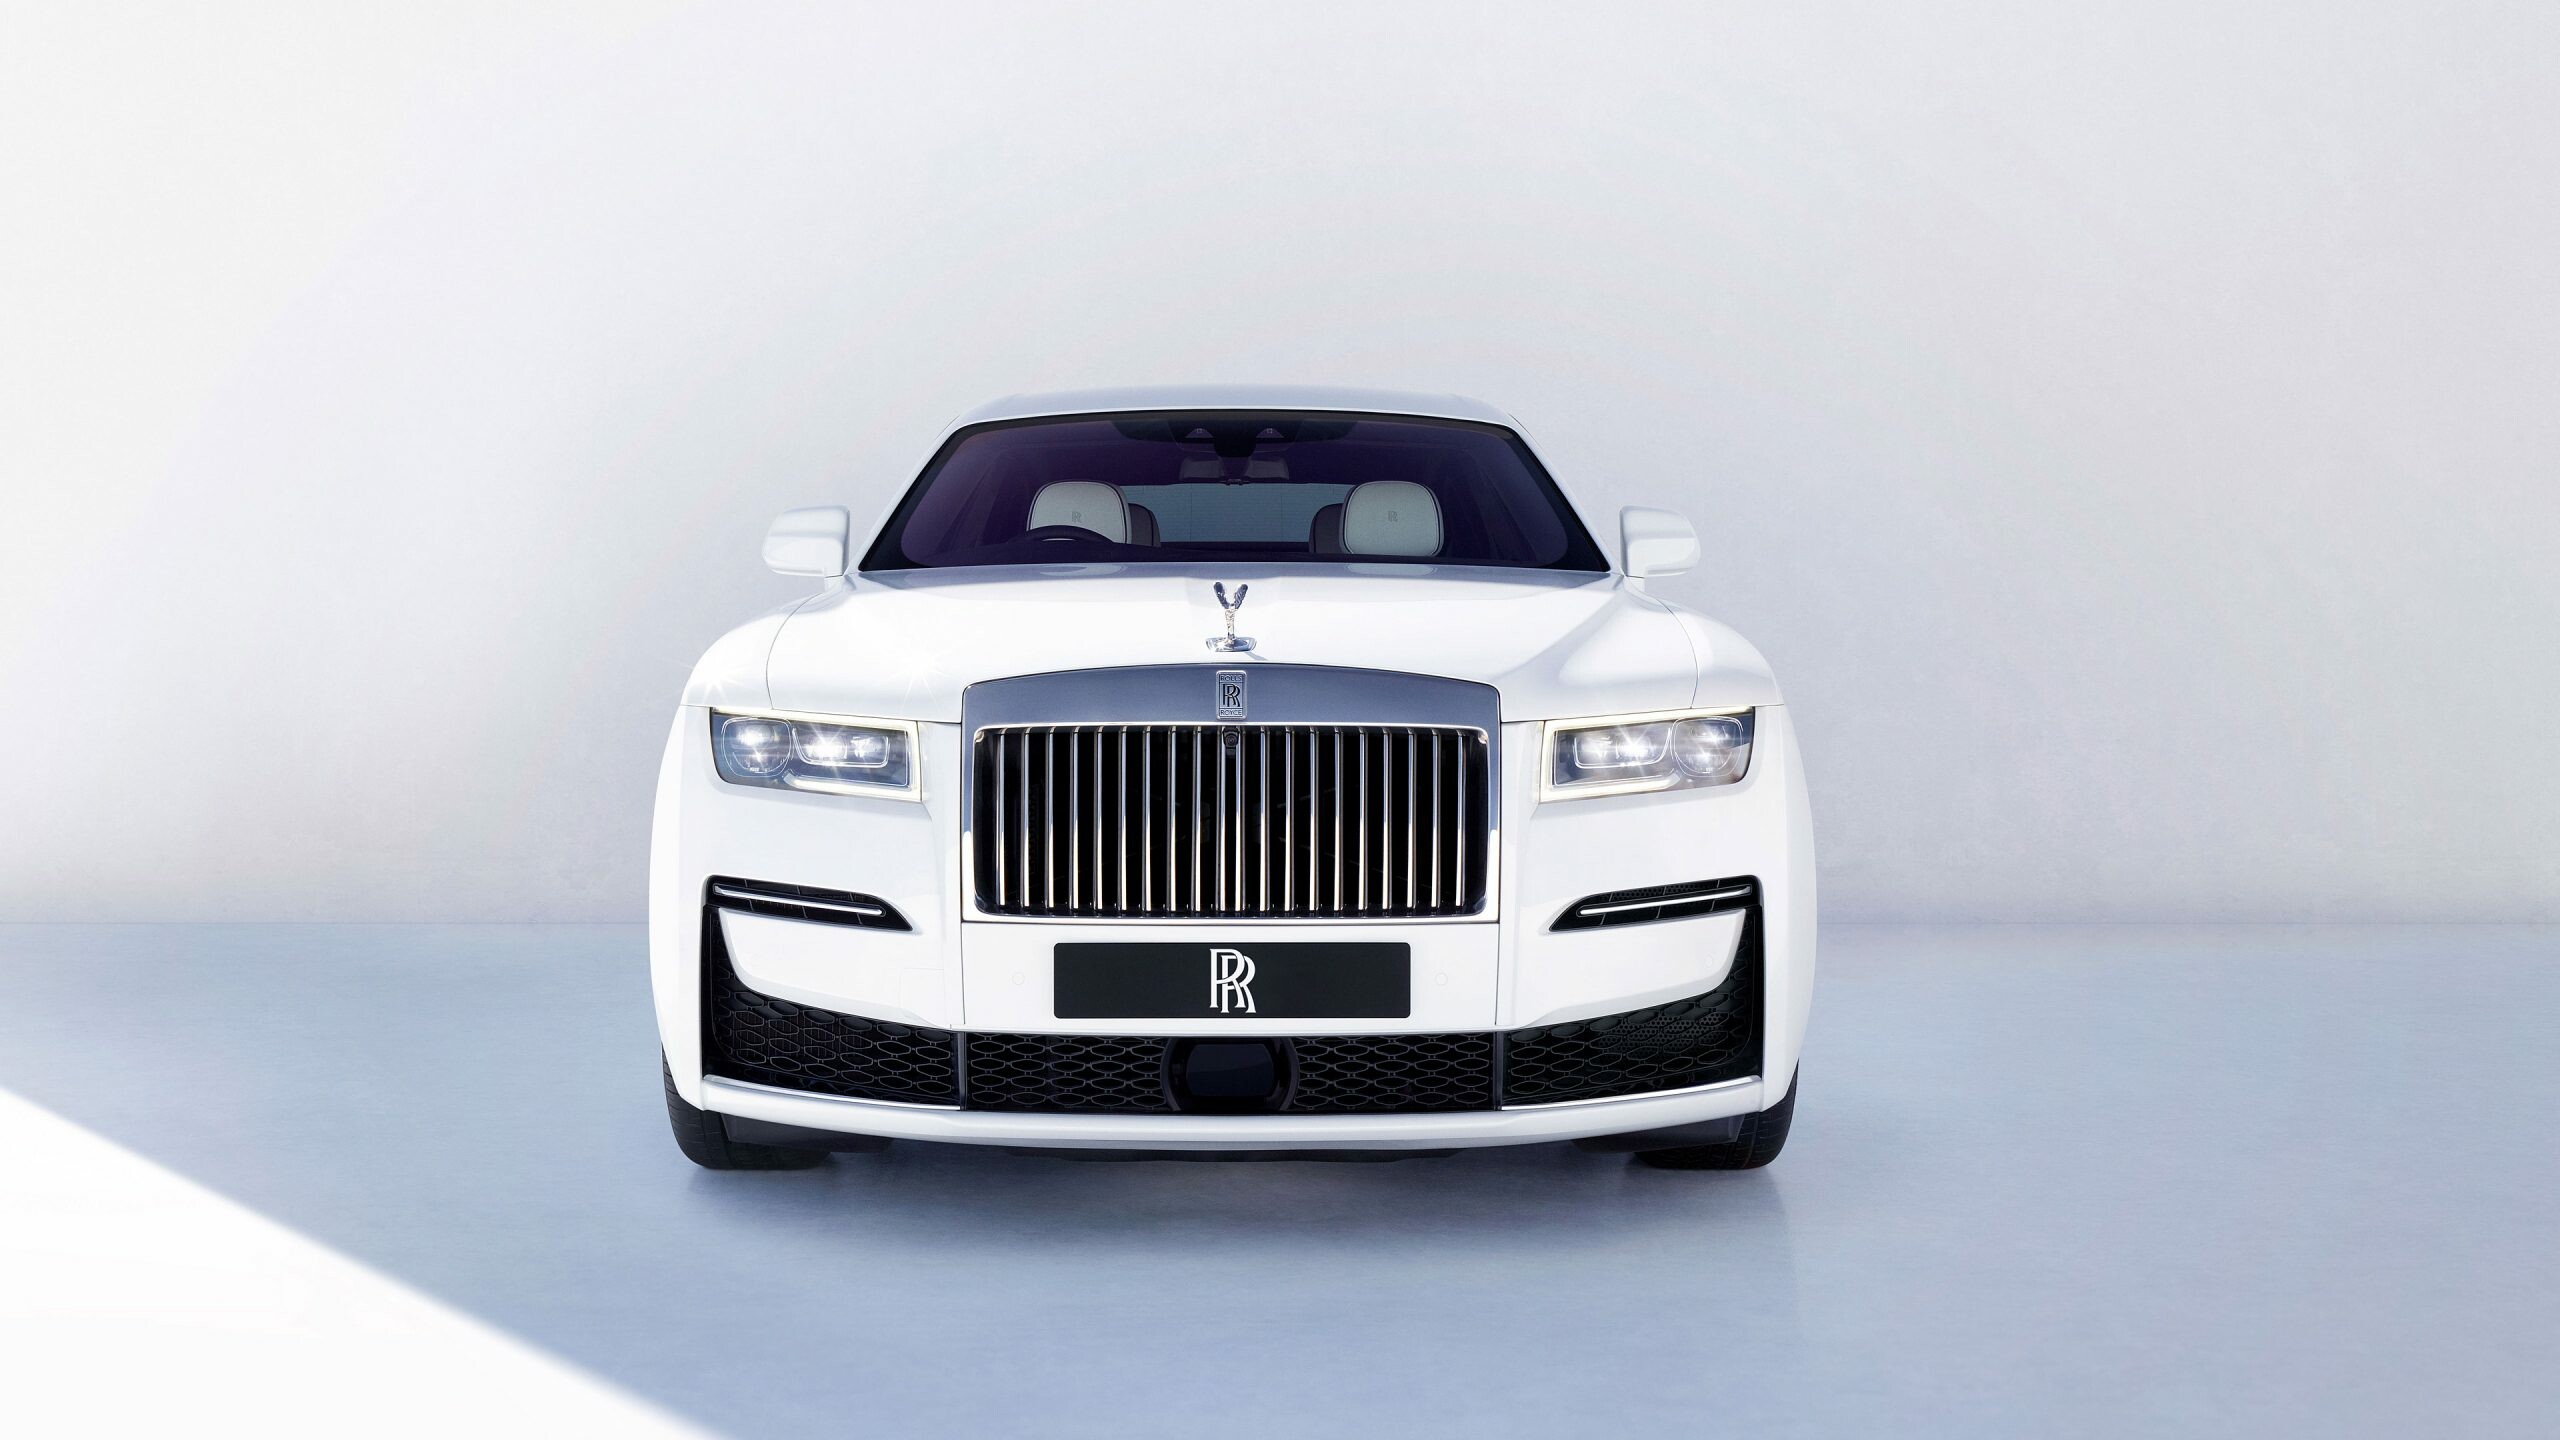 2021 Rolls Royce Ghost, Cutting-edge technology, Timeless appeal, Ultimate driving experience, 2560x1440 HD Desktop